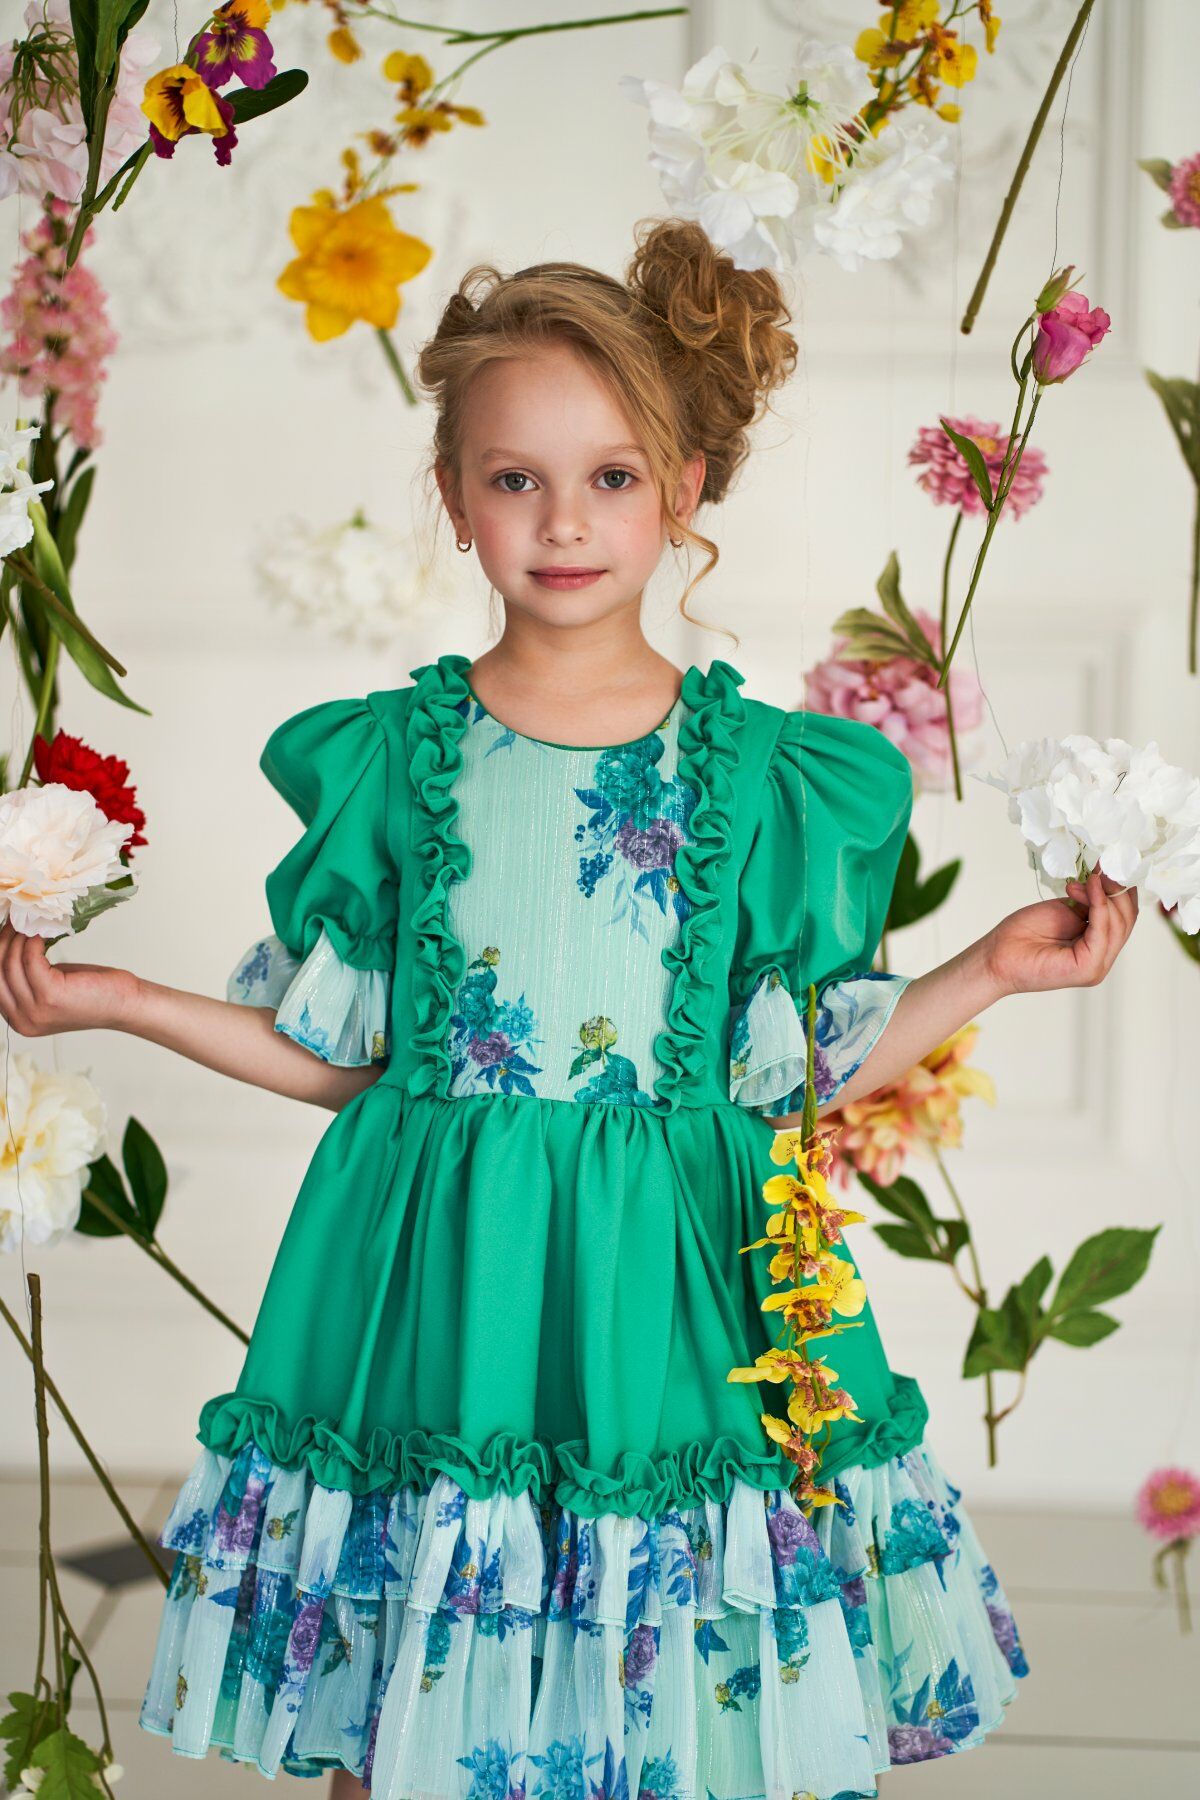 Green Dress For Girls With a Bow